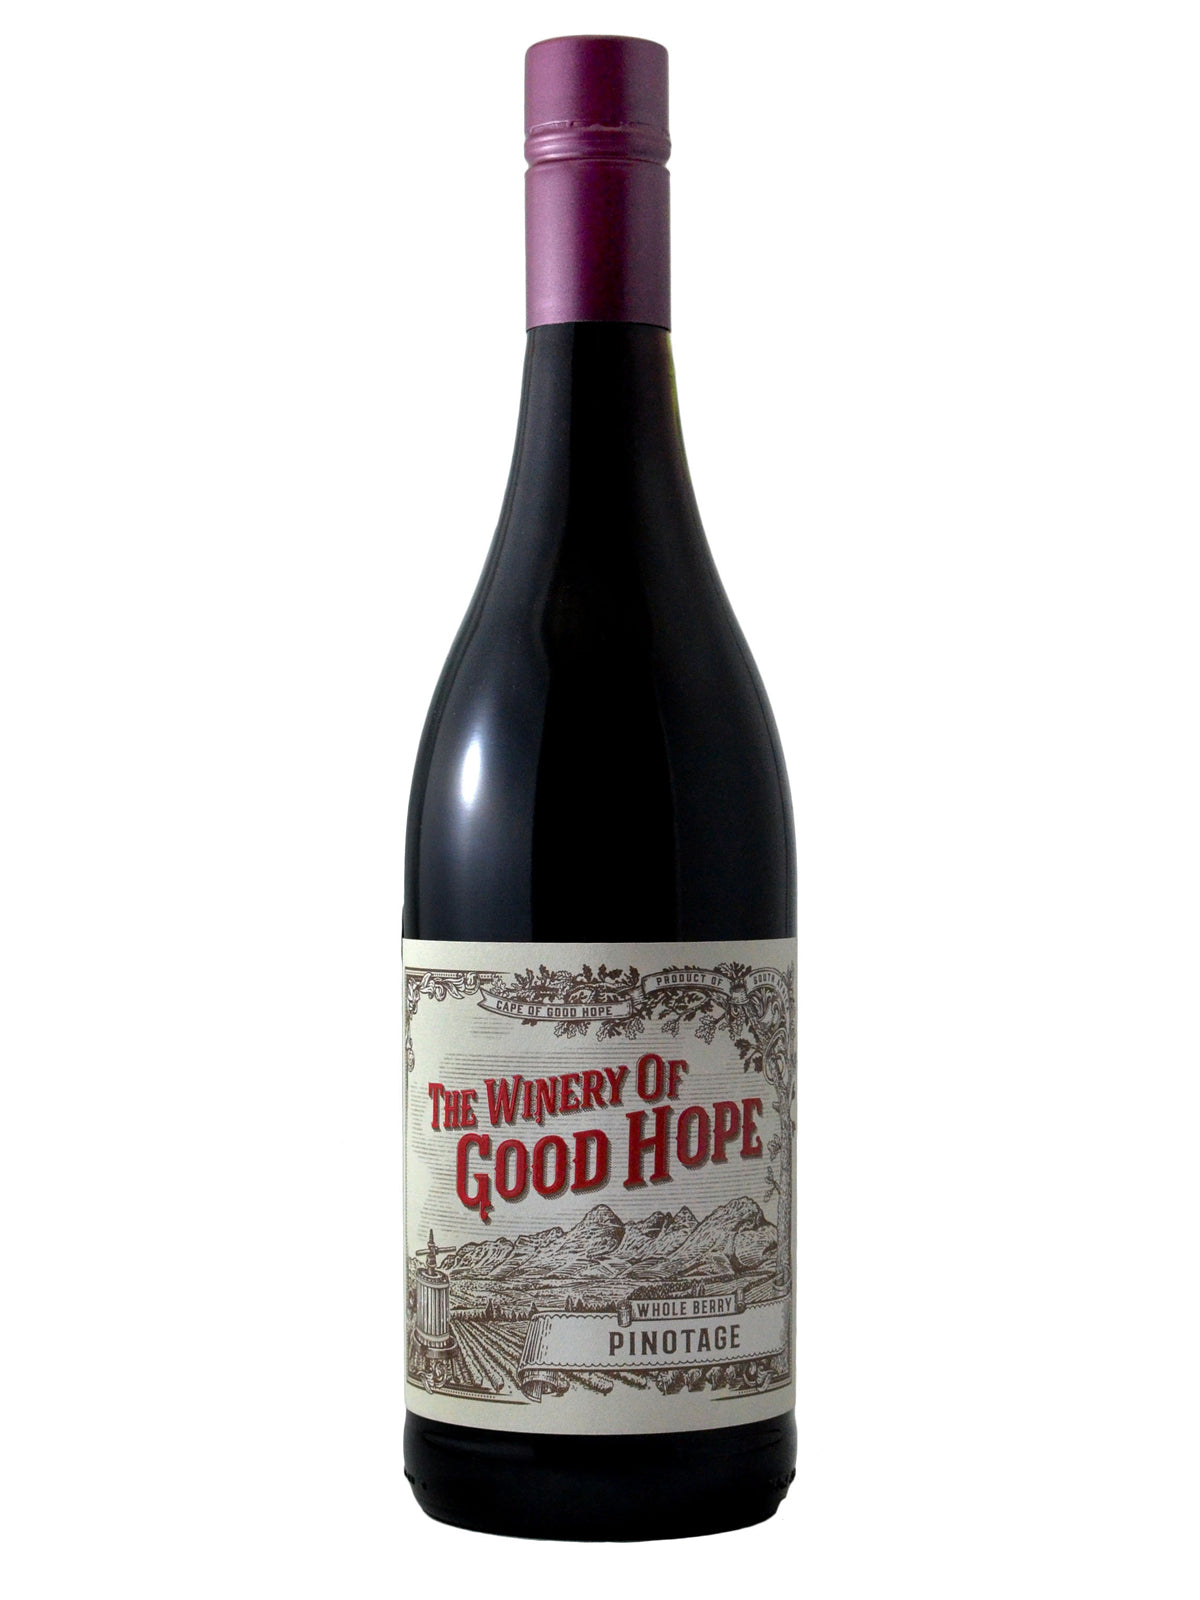 The Winery of Good Hope, Whole Berry Pinotage